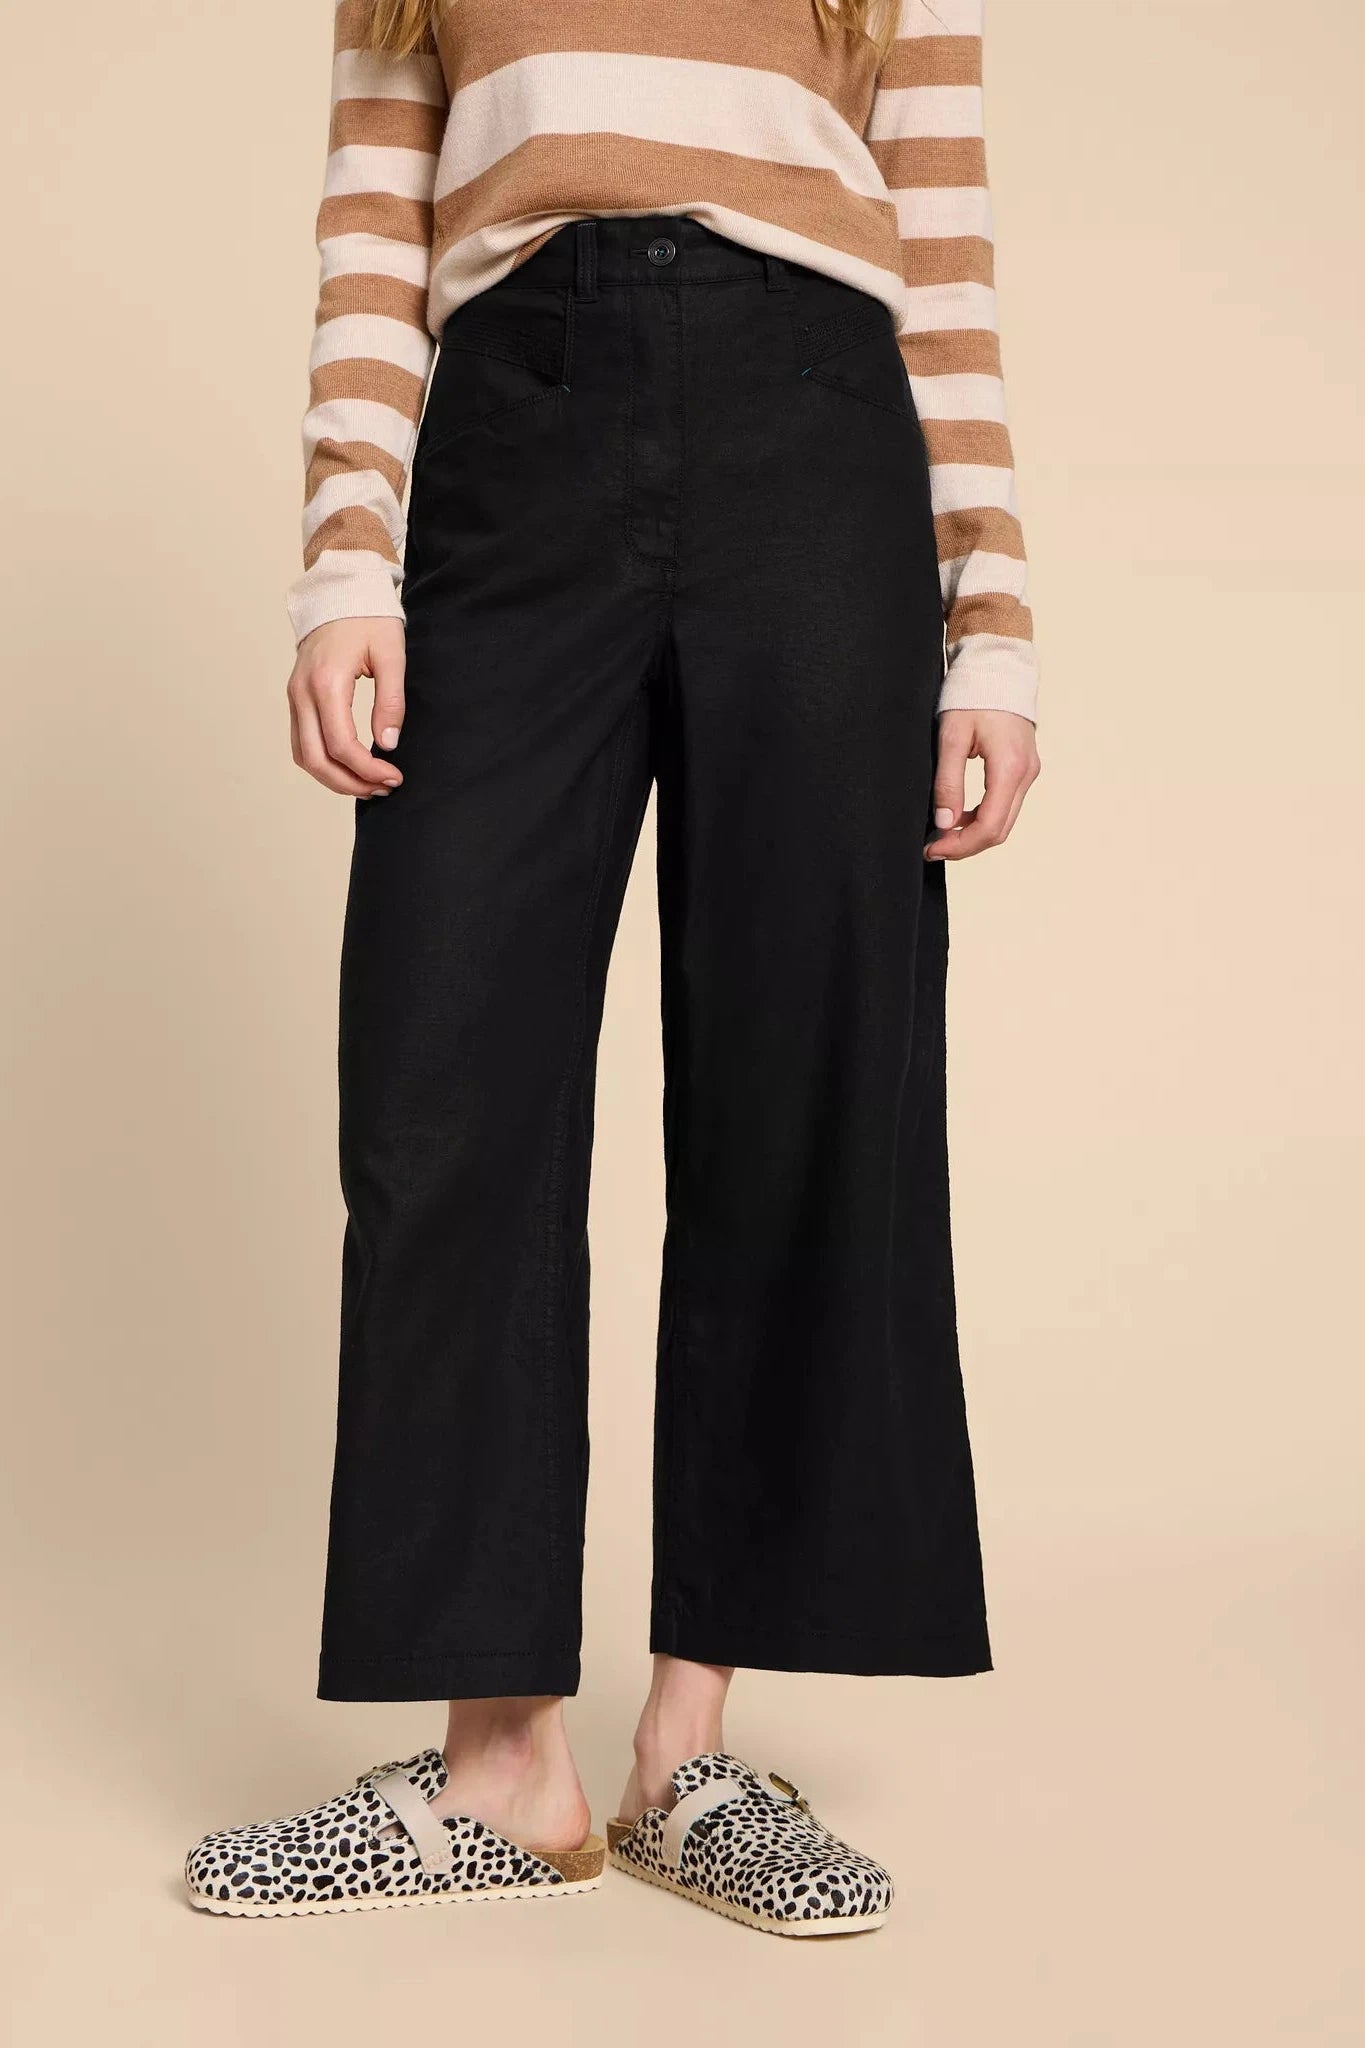 White Stuff Harper Linen Blend Trouser in Pure Black-Womens-Ohh! By Gum - Shop Sustainable